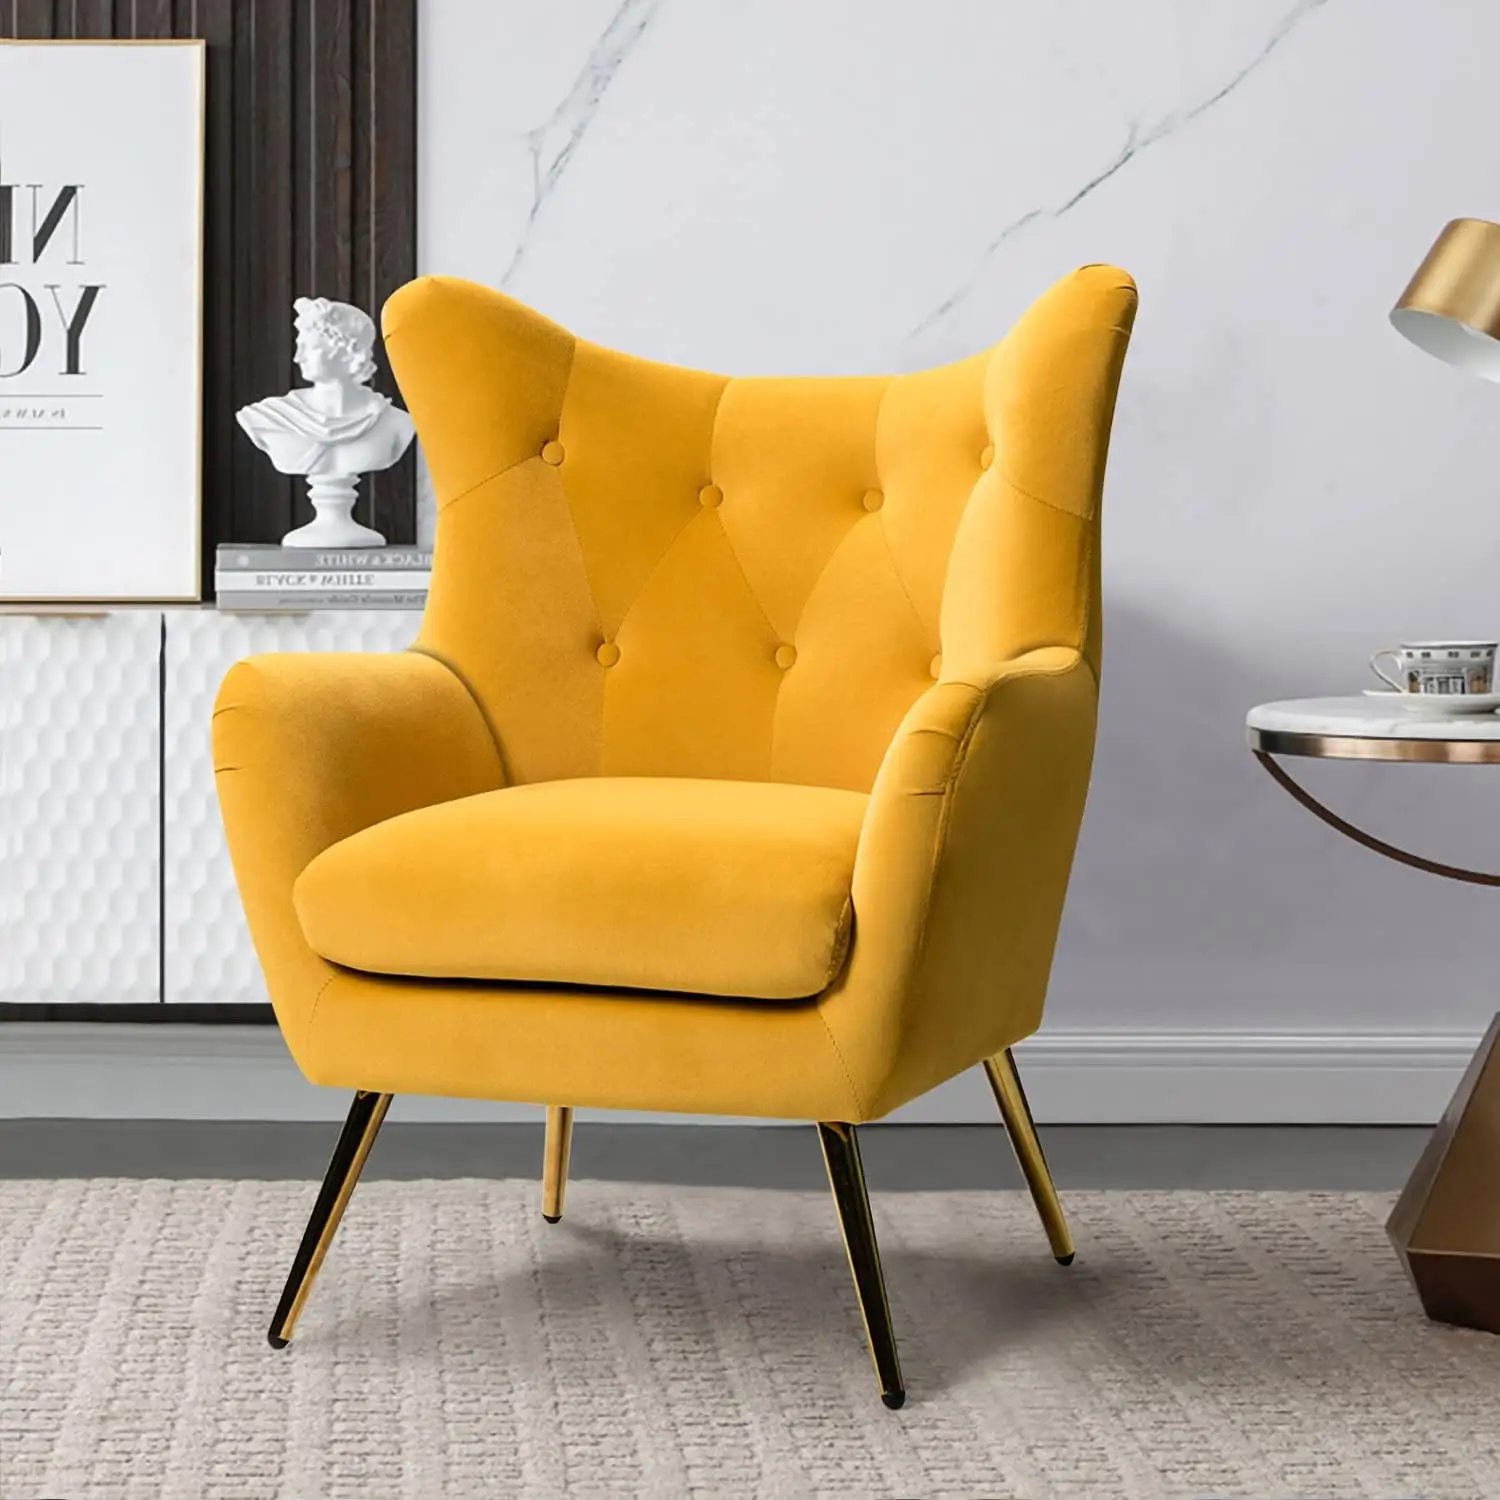 Modern Wingback Arm Chair Tufted Upholstered Living Room Bedroom Yellow Velvet Accent Lounge Chair